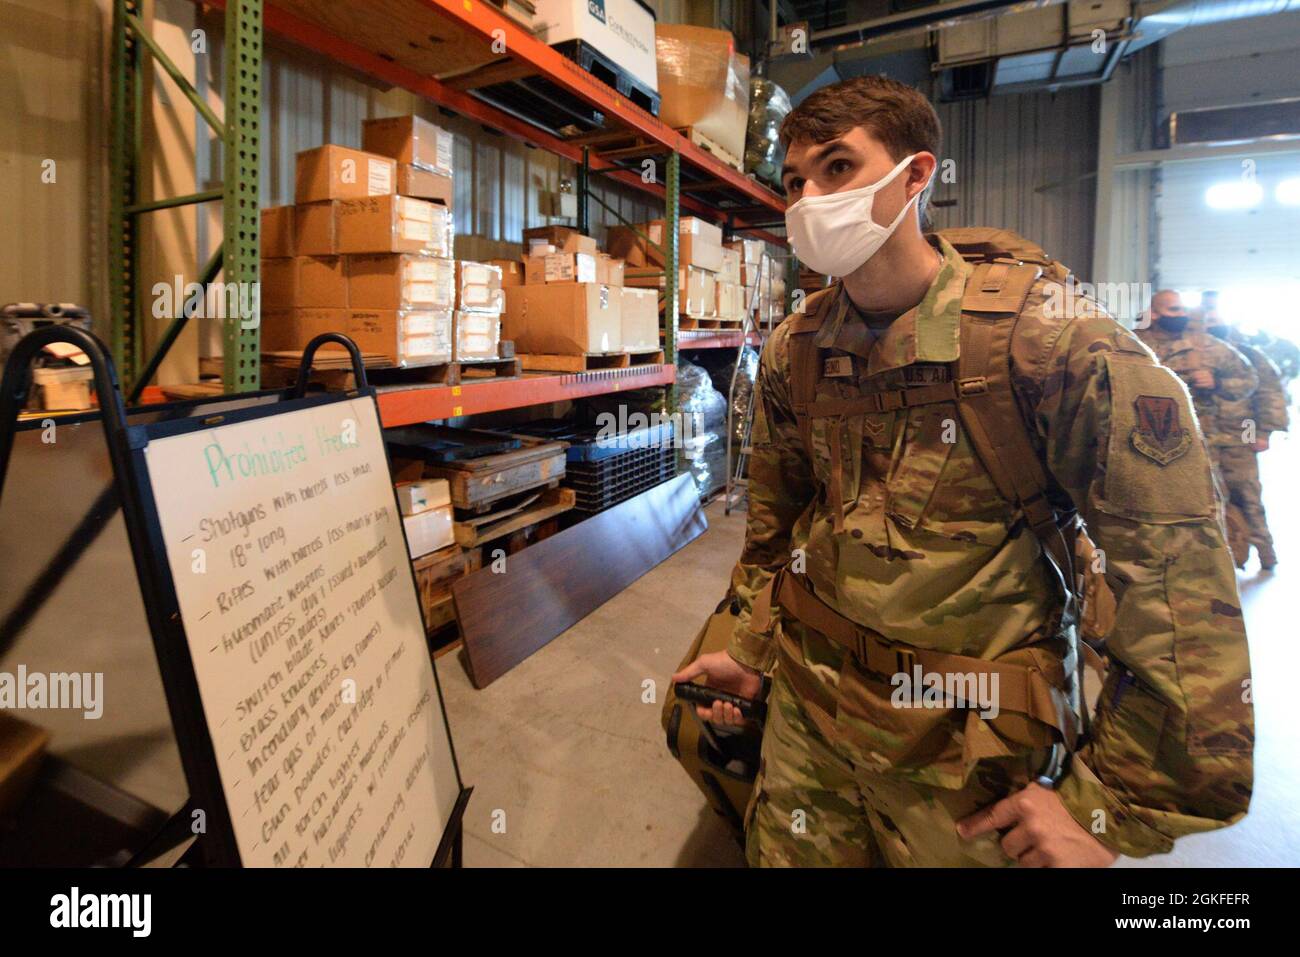 U.S. Air Force Airman 1st Class Brian Angelino, a sheet metal mechanic with the 177th Fighter Wing of the New Jersey Air National Guard, reviews a prohibited items list as he processes through the 177th Logistics Readiness Squadron warehouse area, prior to boarding a rotator aircraft at Atlantic City Air National Guard Base, N.J., Apr. 6, 2021. 177FW Airmen boarded the Boeing 747 rotator aircraft for an Air Expeditionary Force deployment to the Middle East, in support of U.S. Central Command. Stock Photo